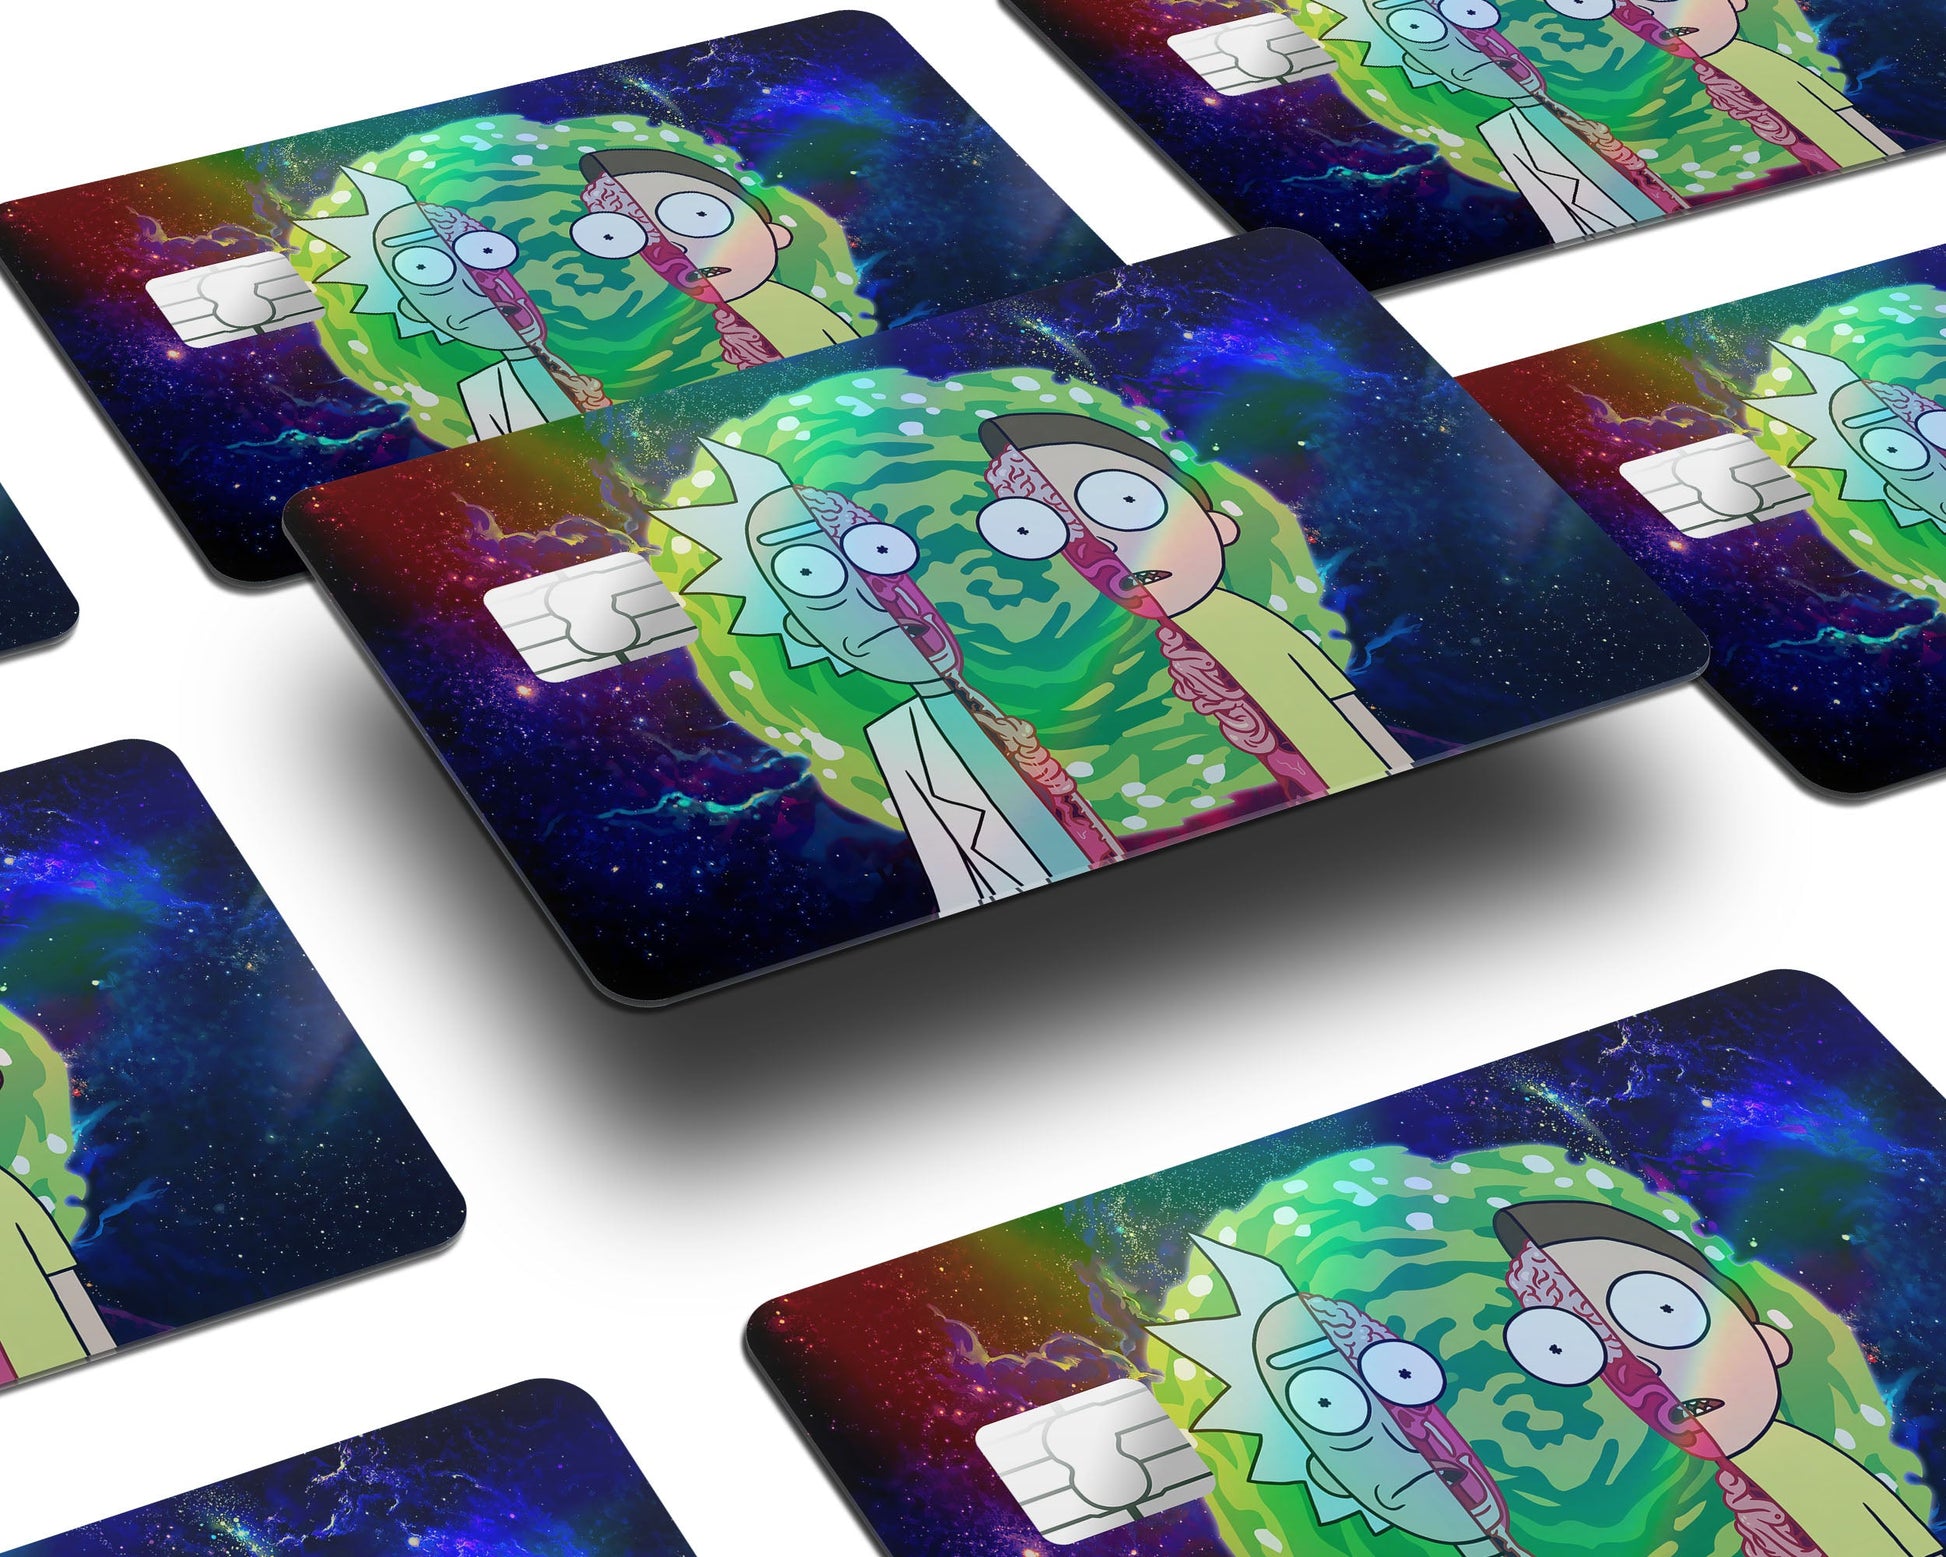 Anime Town Creations Holographic Credit Card Rick and Morty Portal Split Window Skins - Anime Rick and Morty Holographic Credit Card Skin